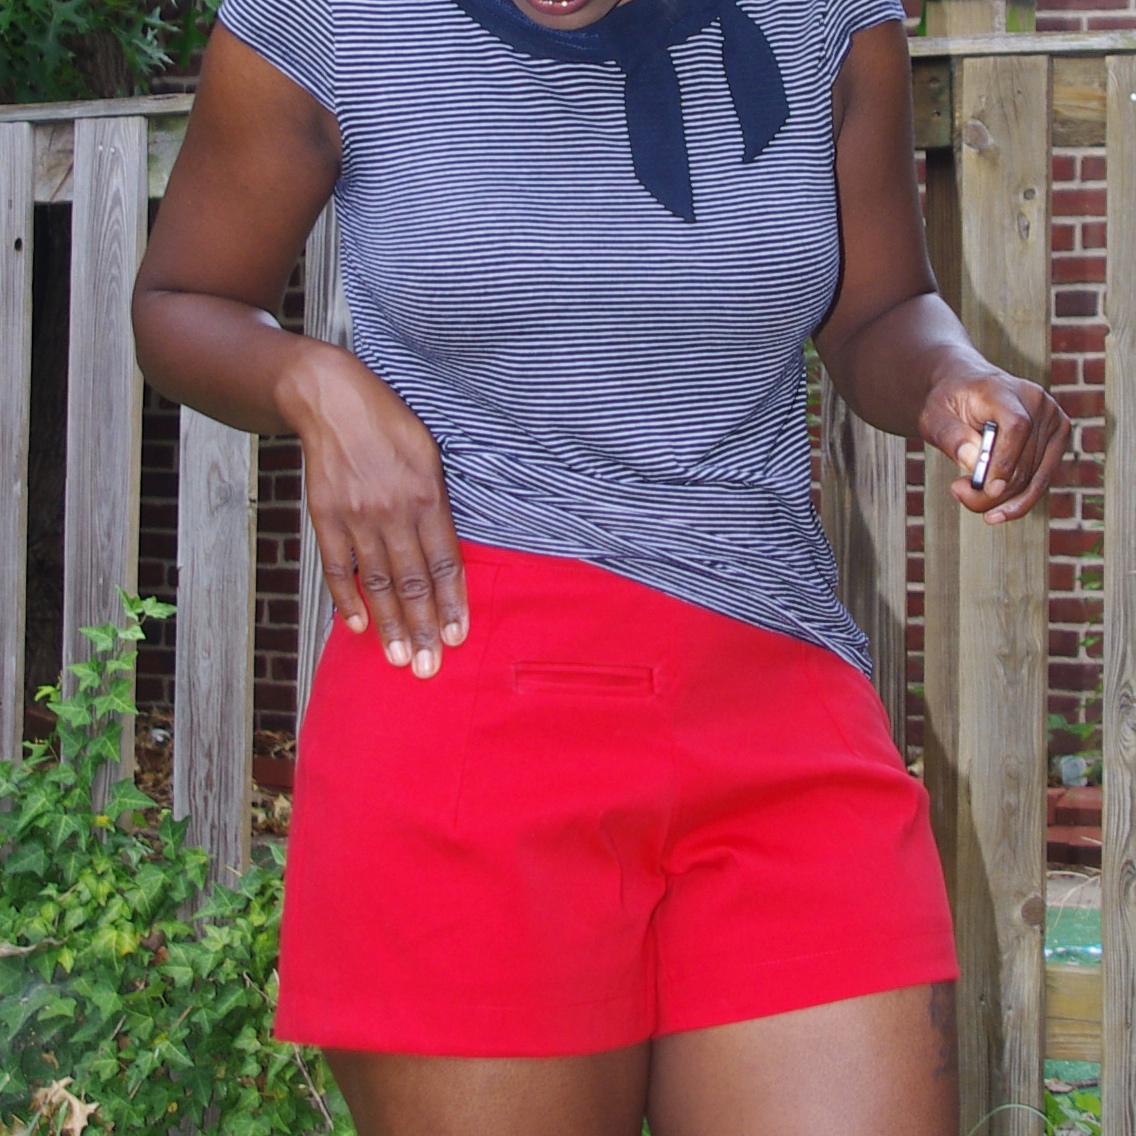 Preppy Red Poplin Shorts (and a dash of #fail)